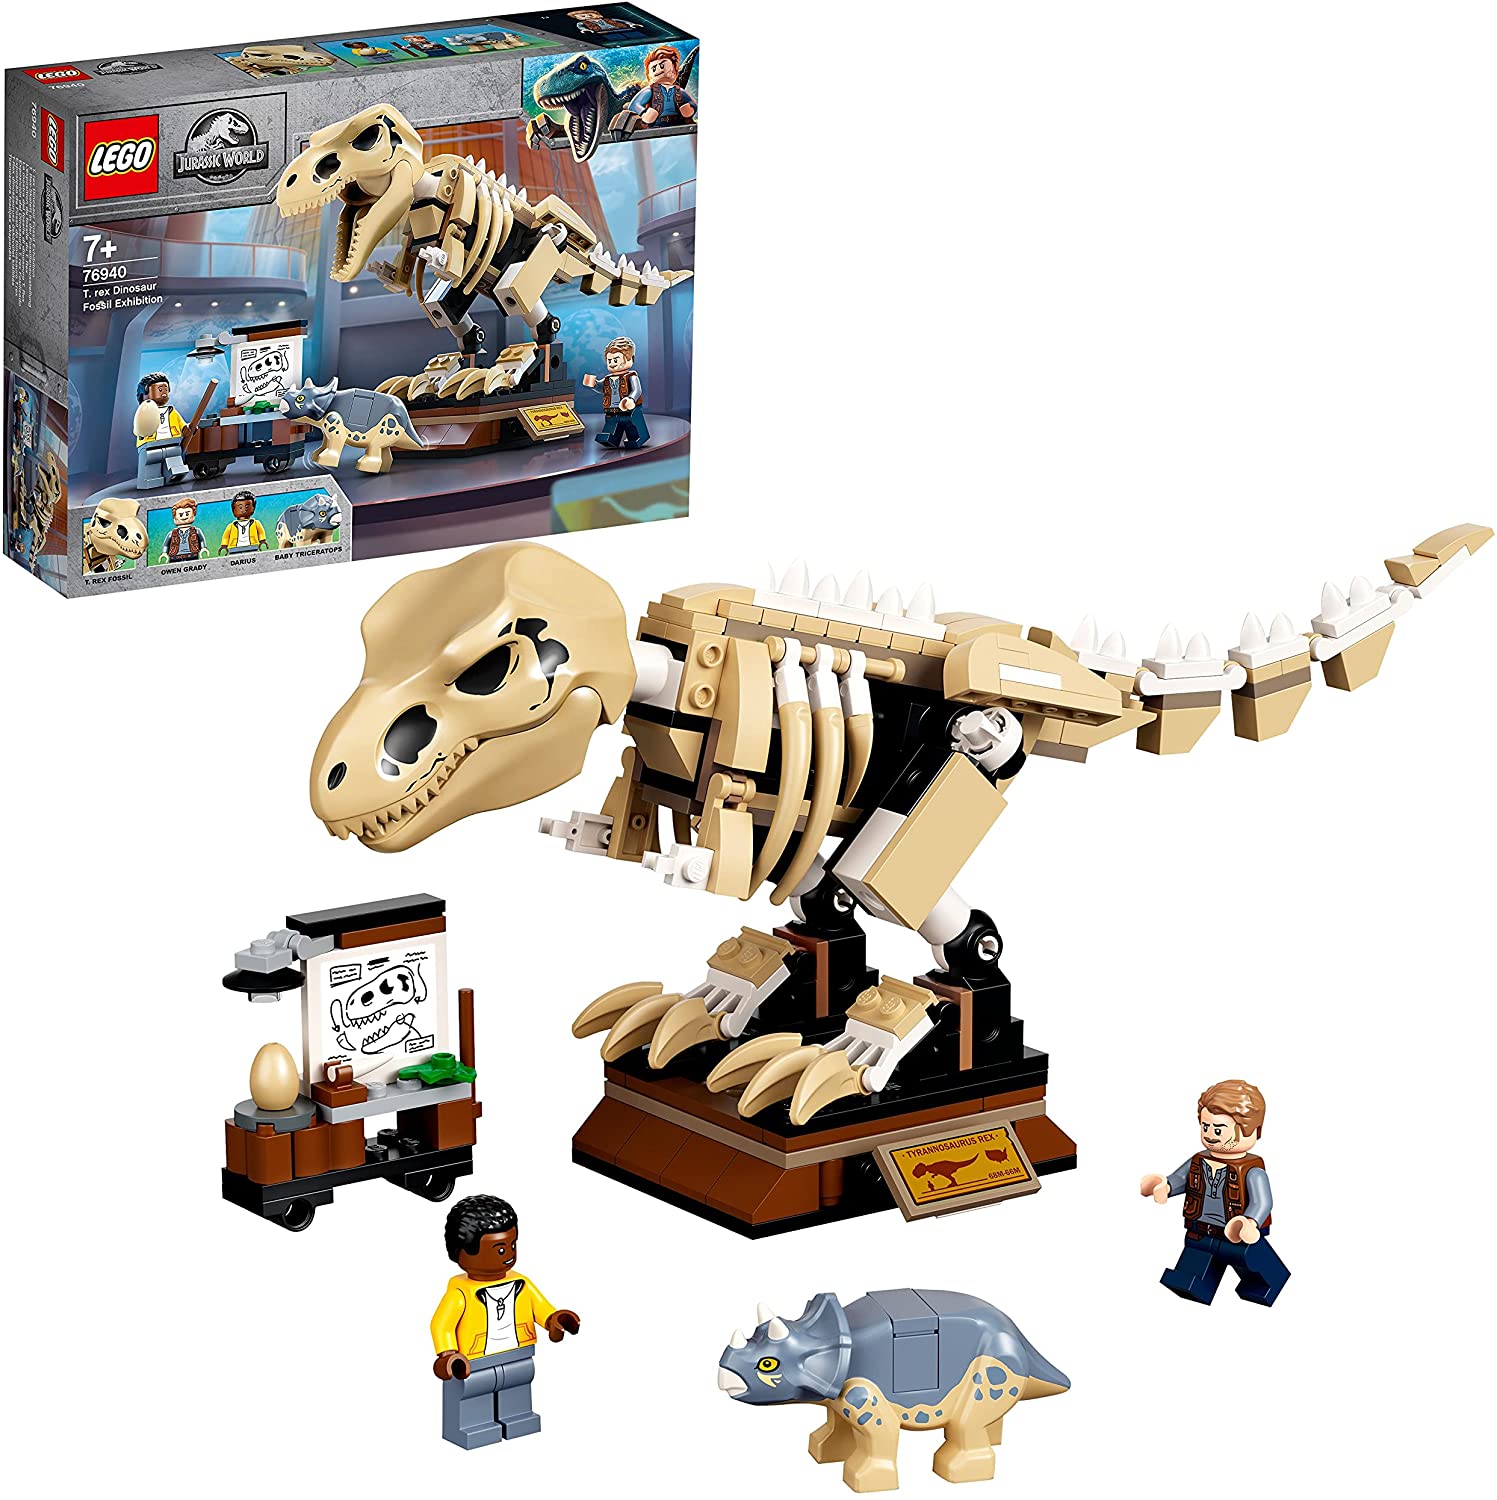 LEGO 76940 Jurassic World T. Rex Skeleton in Fossil Exhibition Toy Set for 